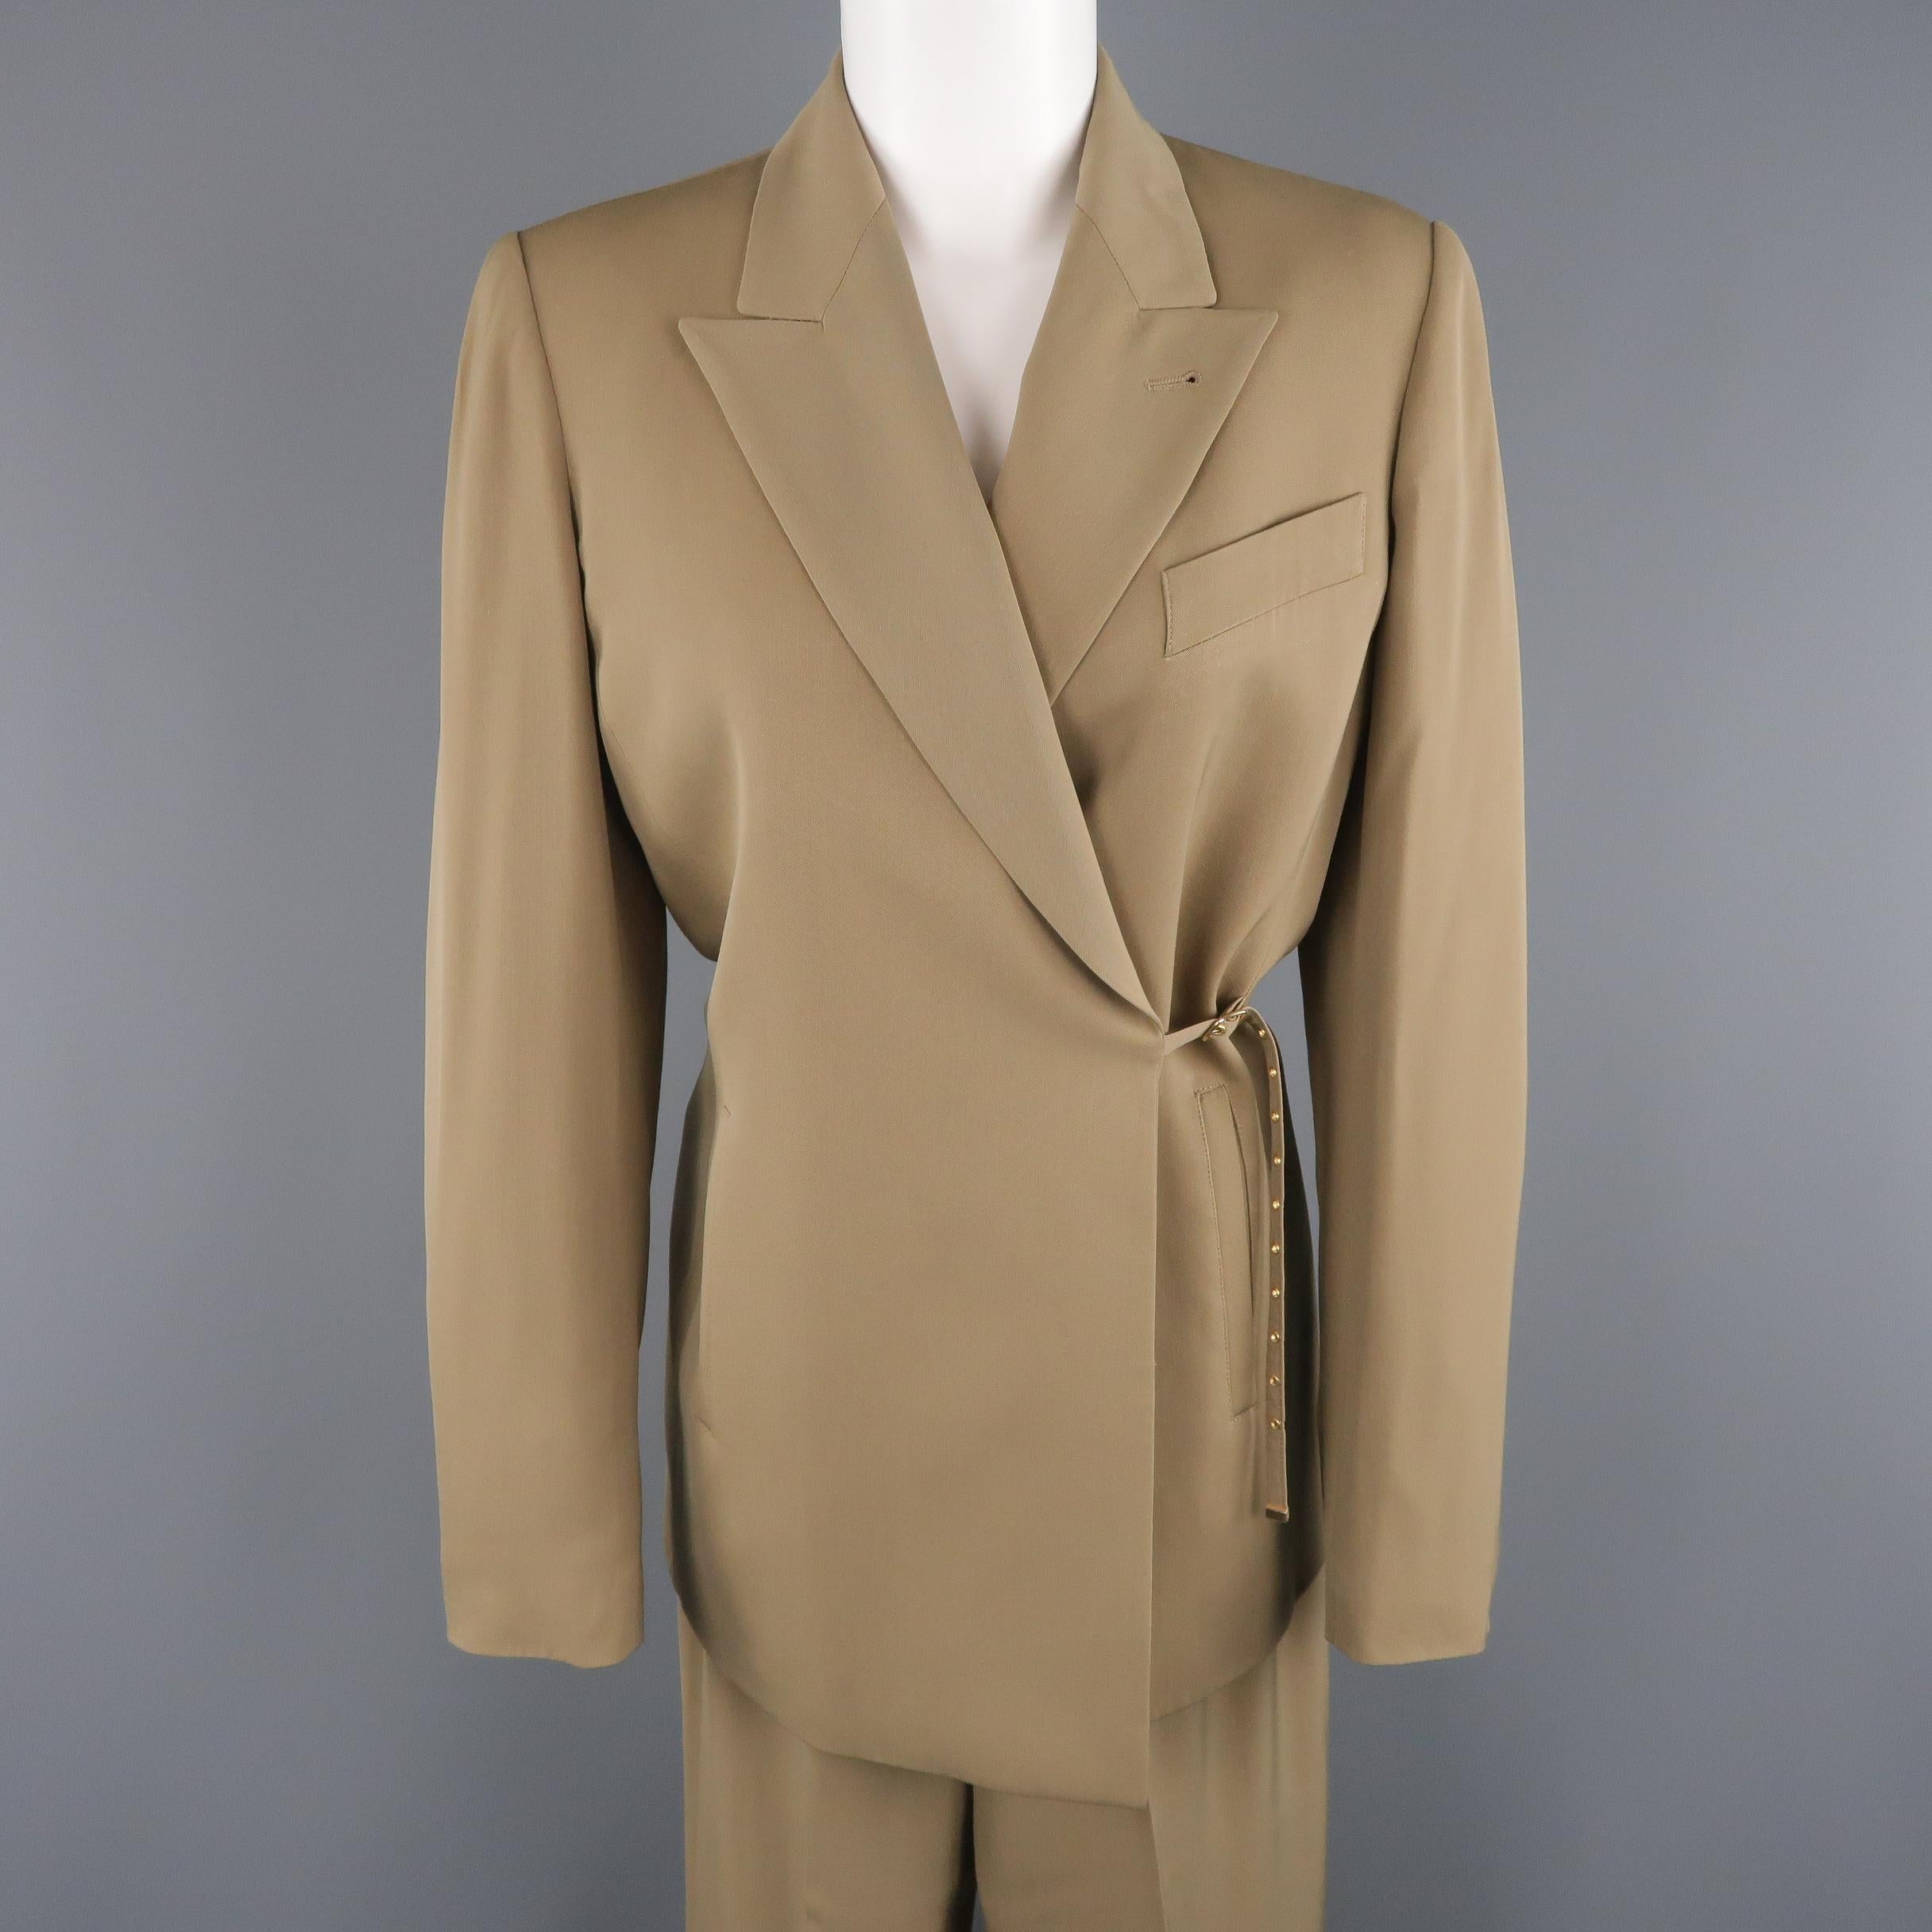 Vintage JEAN PAUL GAULTIER CLASSIQUE suit comes in khaki twill and includes a peak lapel sport jacket with wrapped belt closure front, and matching relaxed trousers. Made in Italy.
 
Excellent Pre-Owned Condition.
Marked: US 8
 
Measurements:
